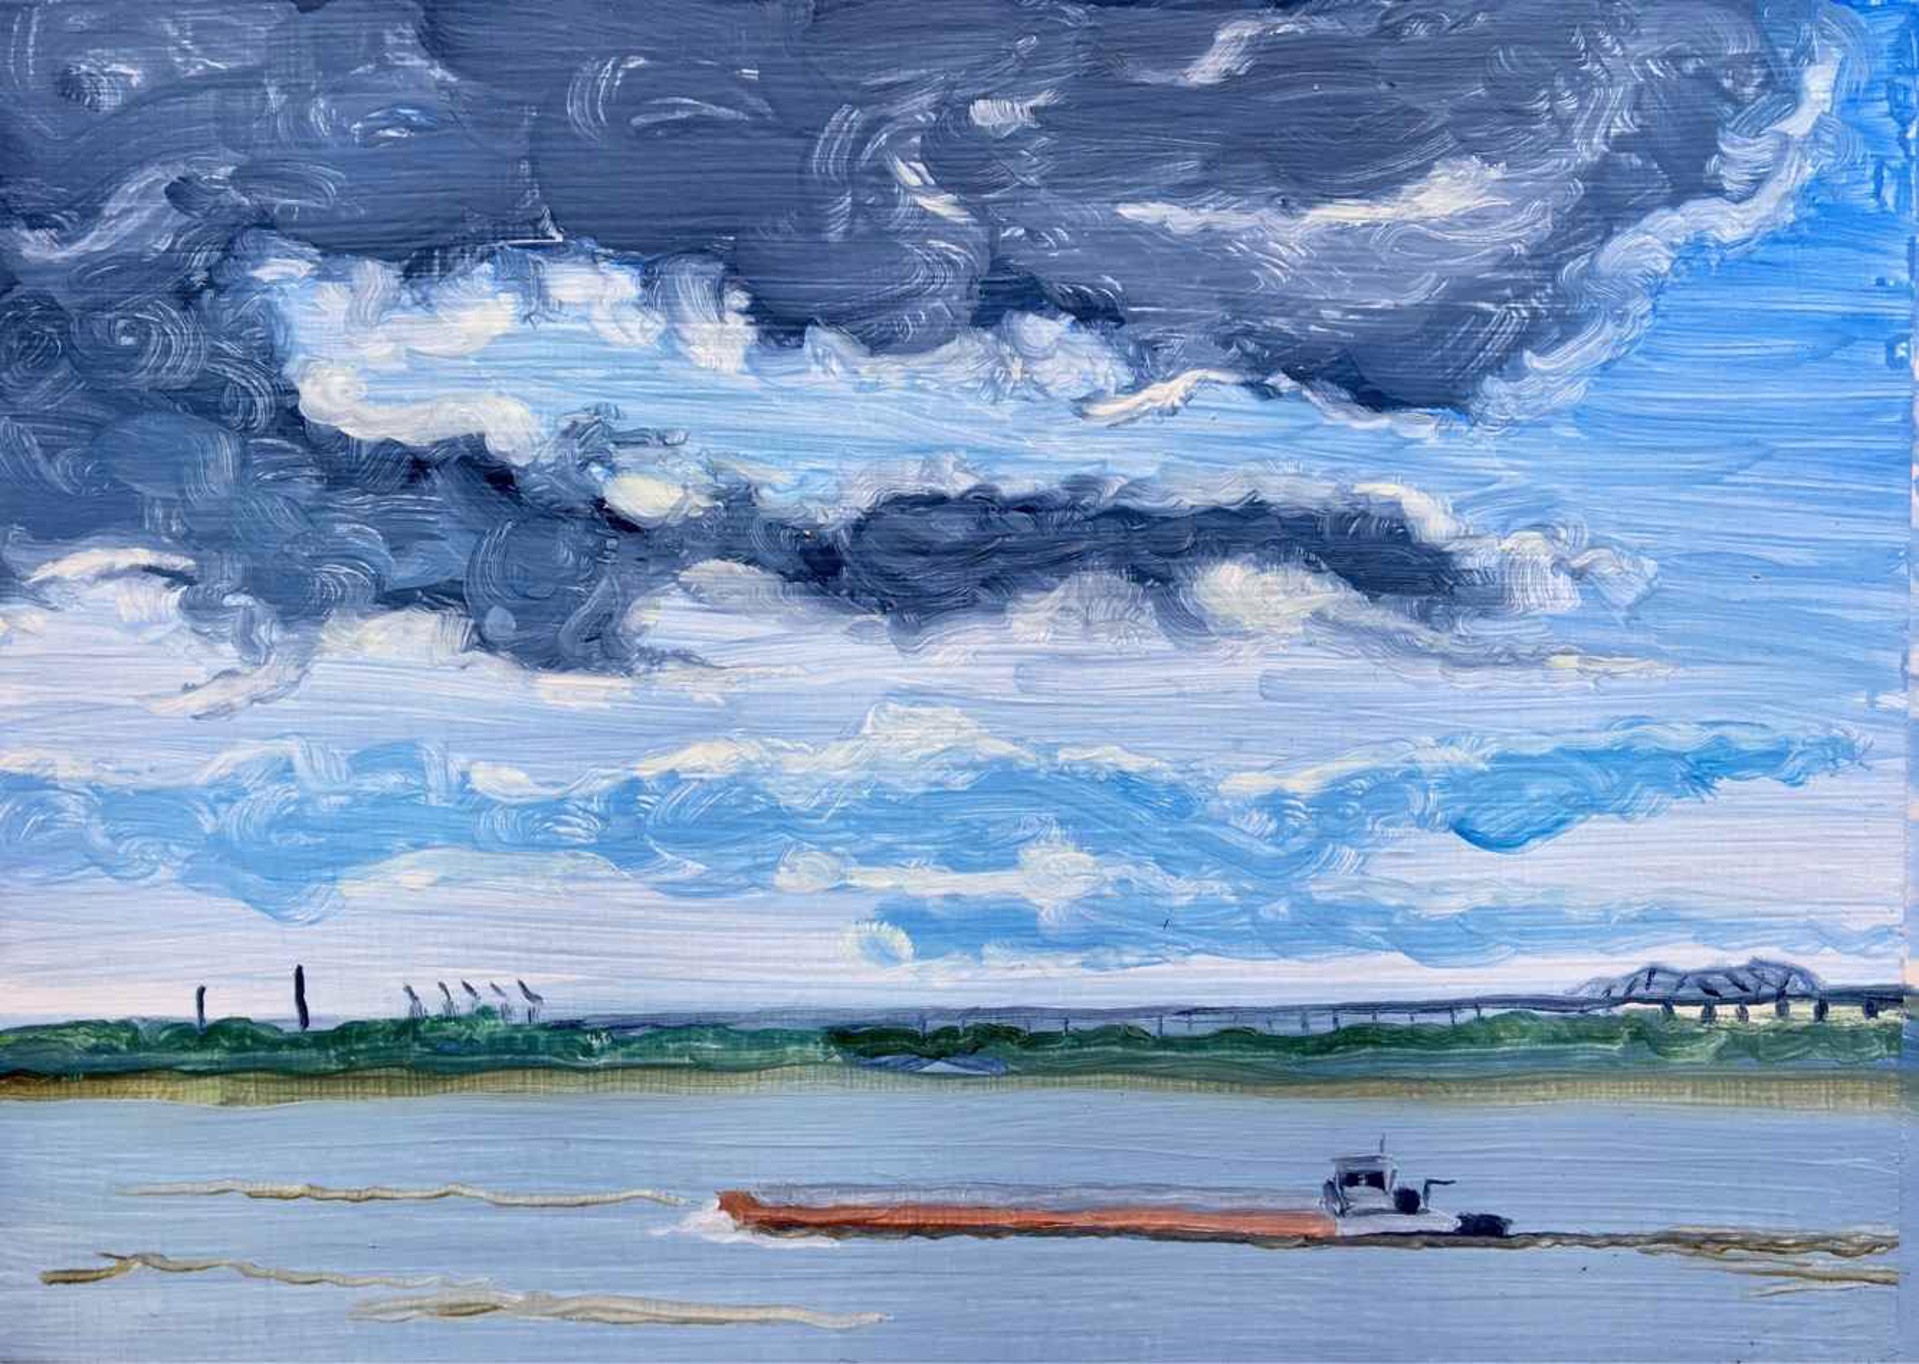 Storm Clouds Rolling In Over the River by Kristin Malin